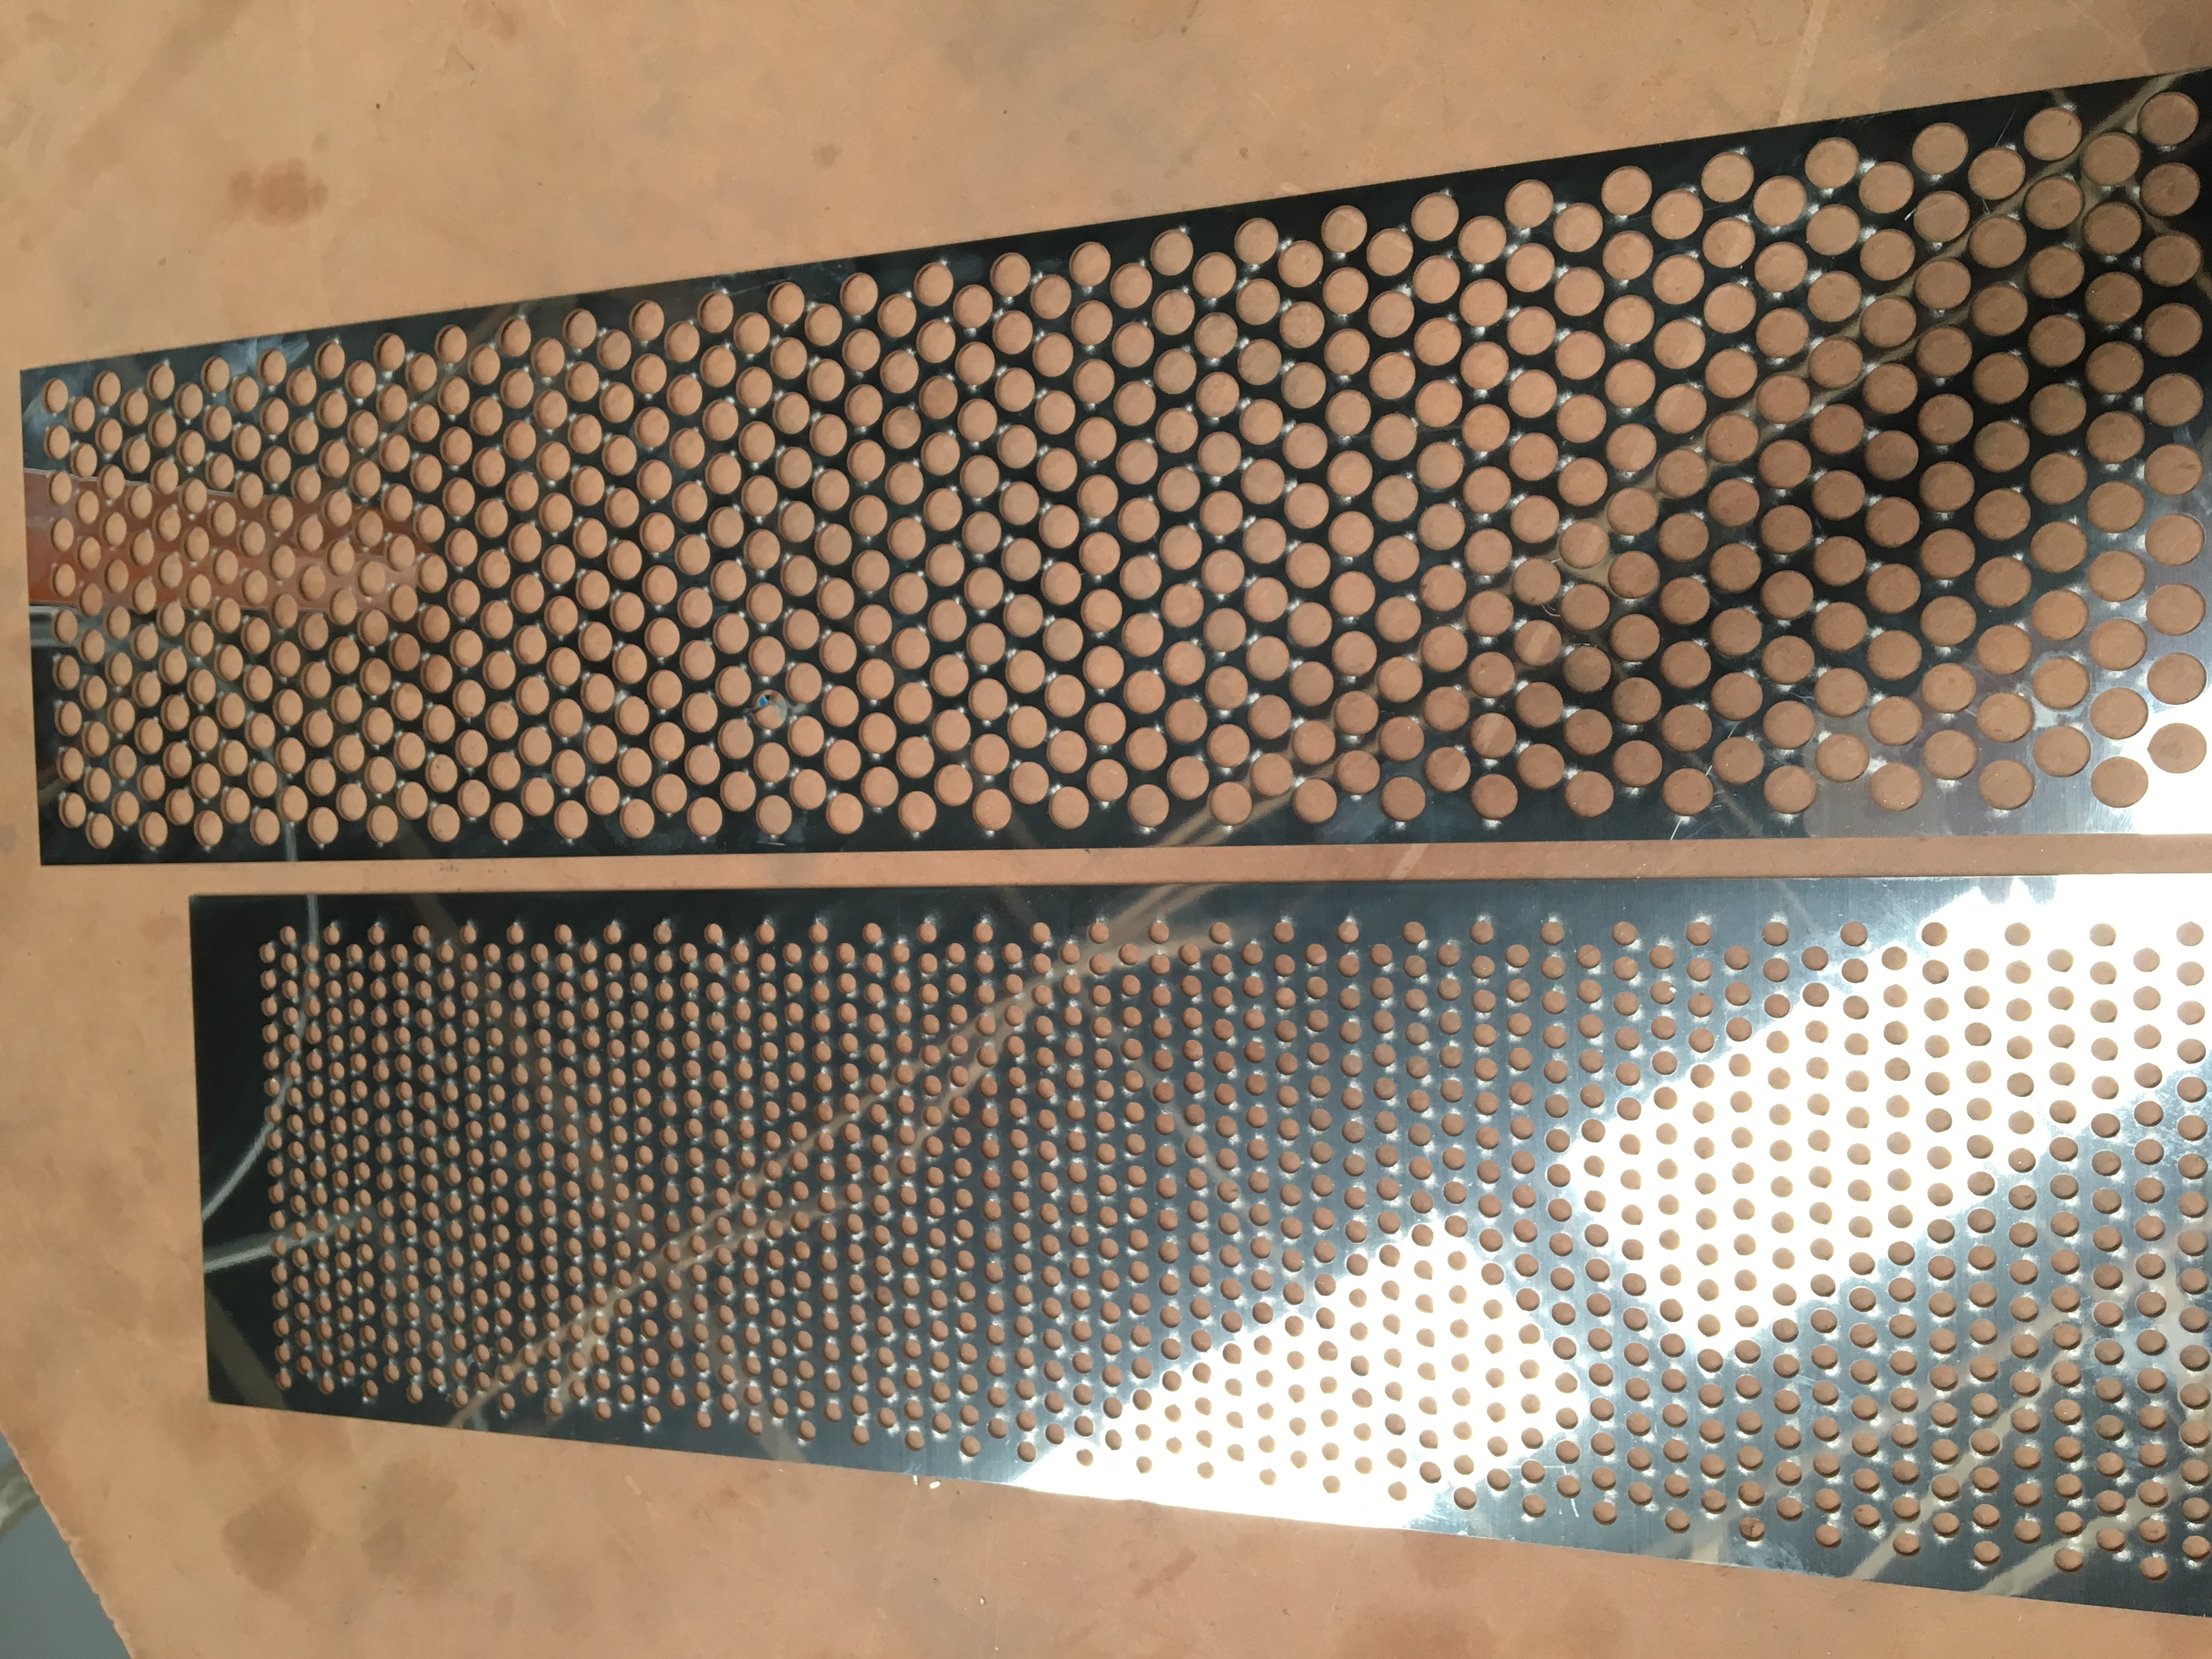 Product image - LASER CUTTING OF METAL SCREENS USED IN FOOD PRODUCTION. CHARLCOAL MESH-SCREENS. CARBON STEEL & STAINLESS STEEL. BENDING & PROFILING OF CUT PARTS